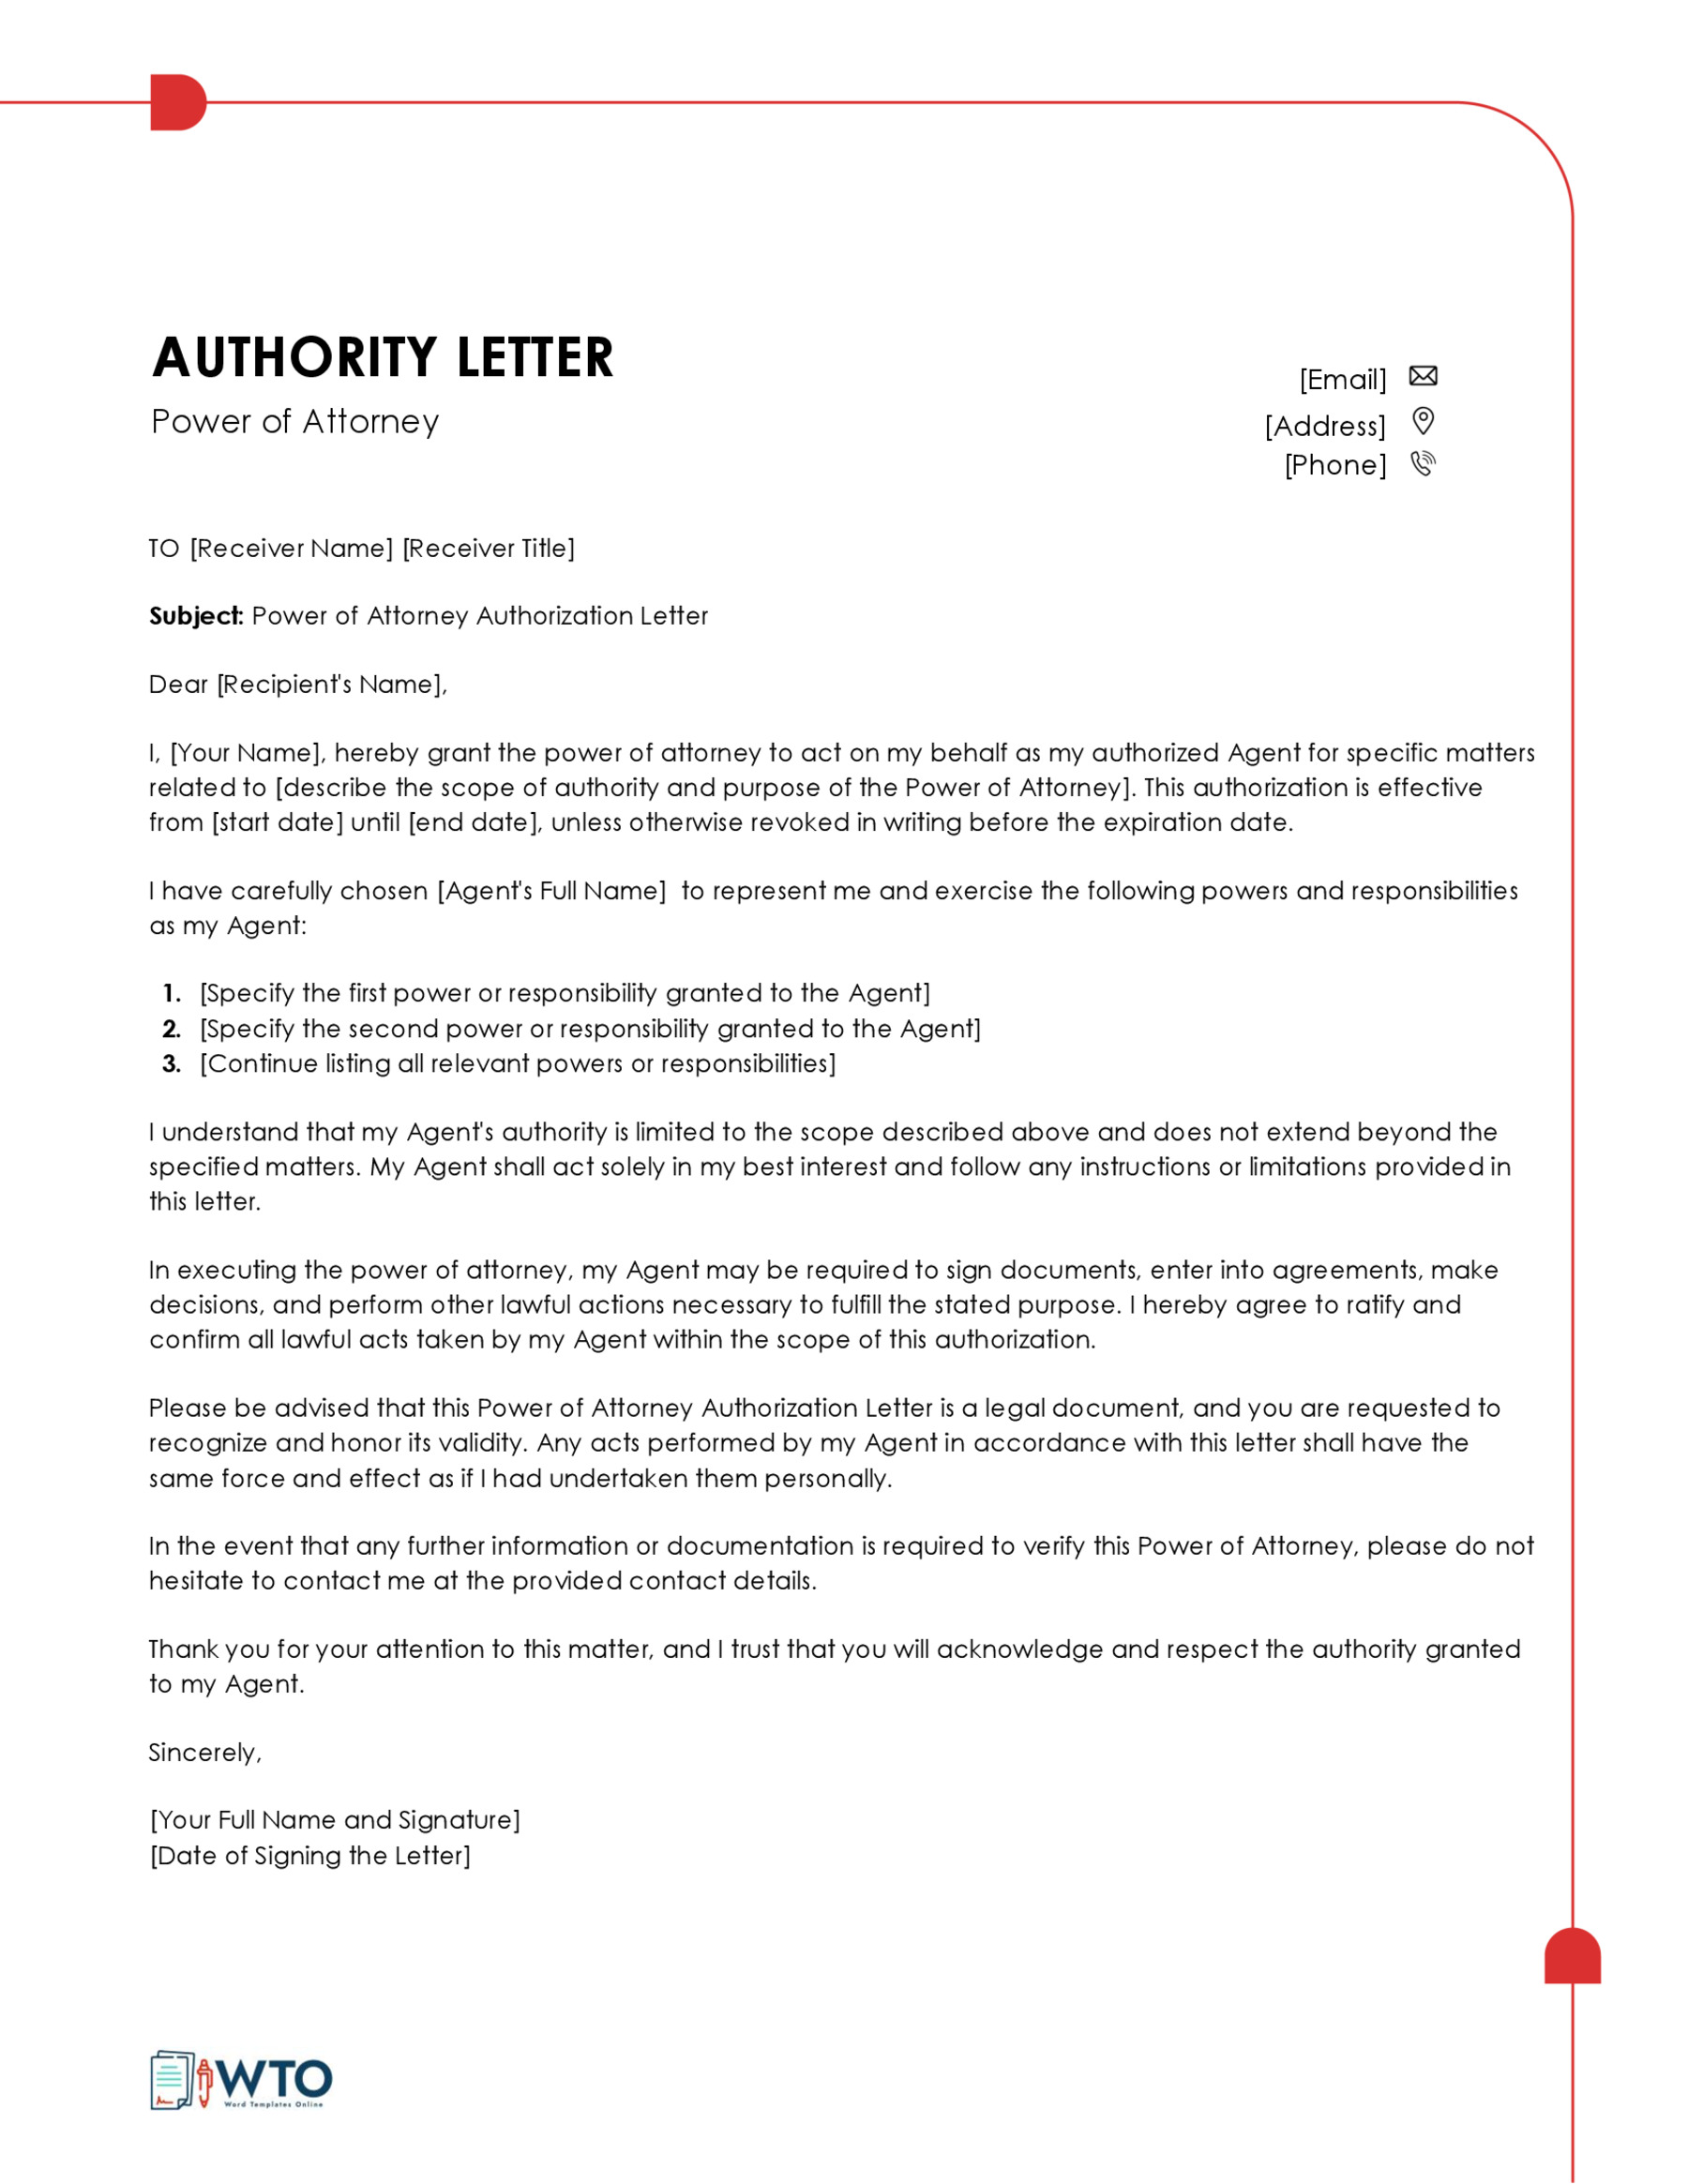 Power of Attorney Letter Sample Free download in ms word